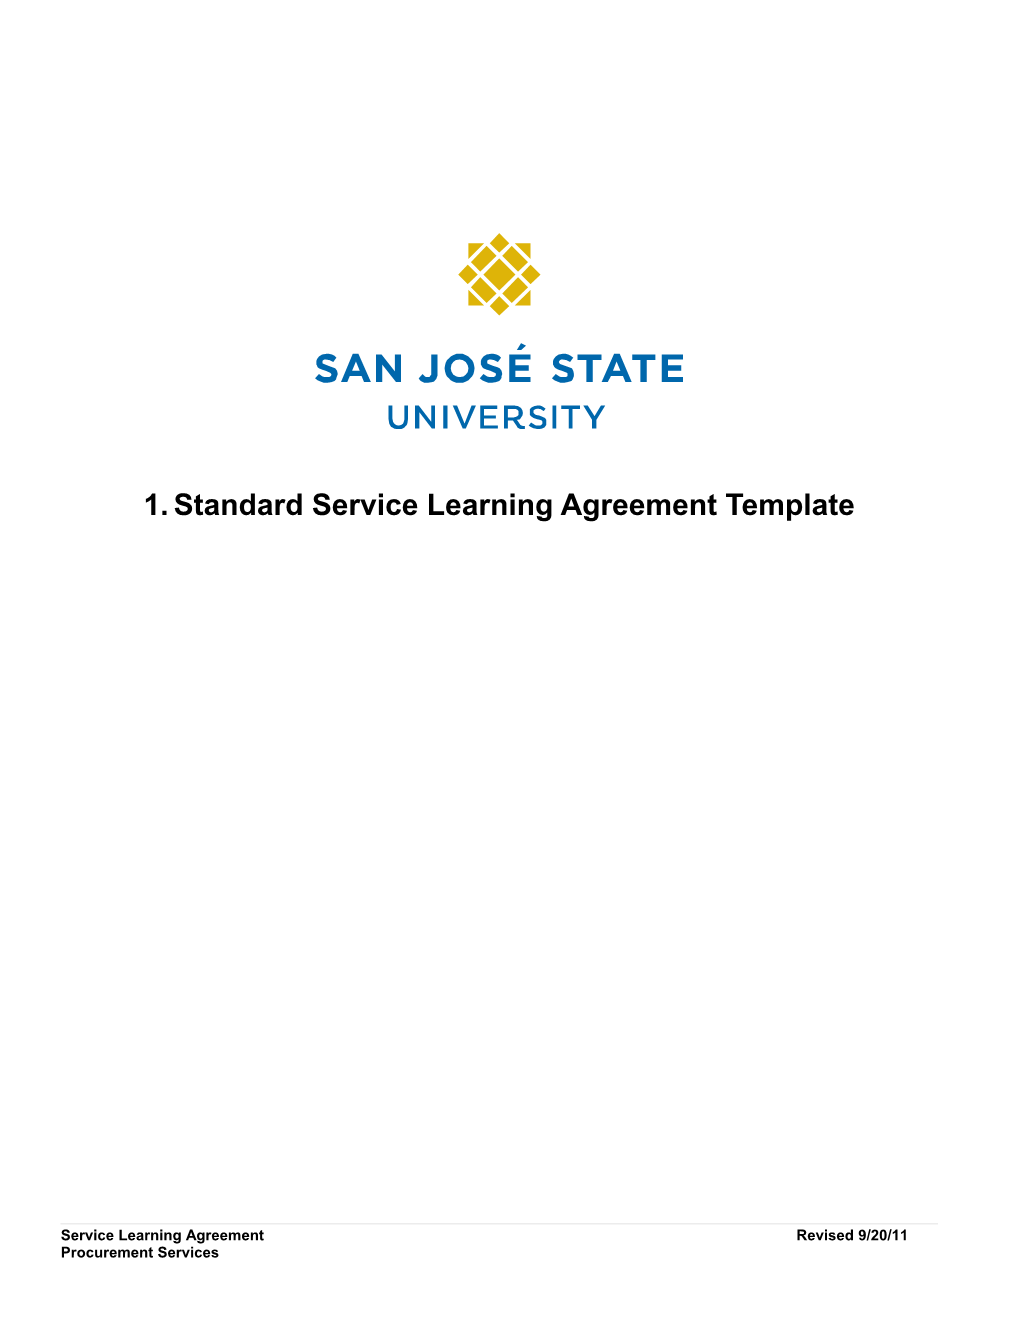 Standard Service Learning Agreement Template